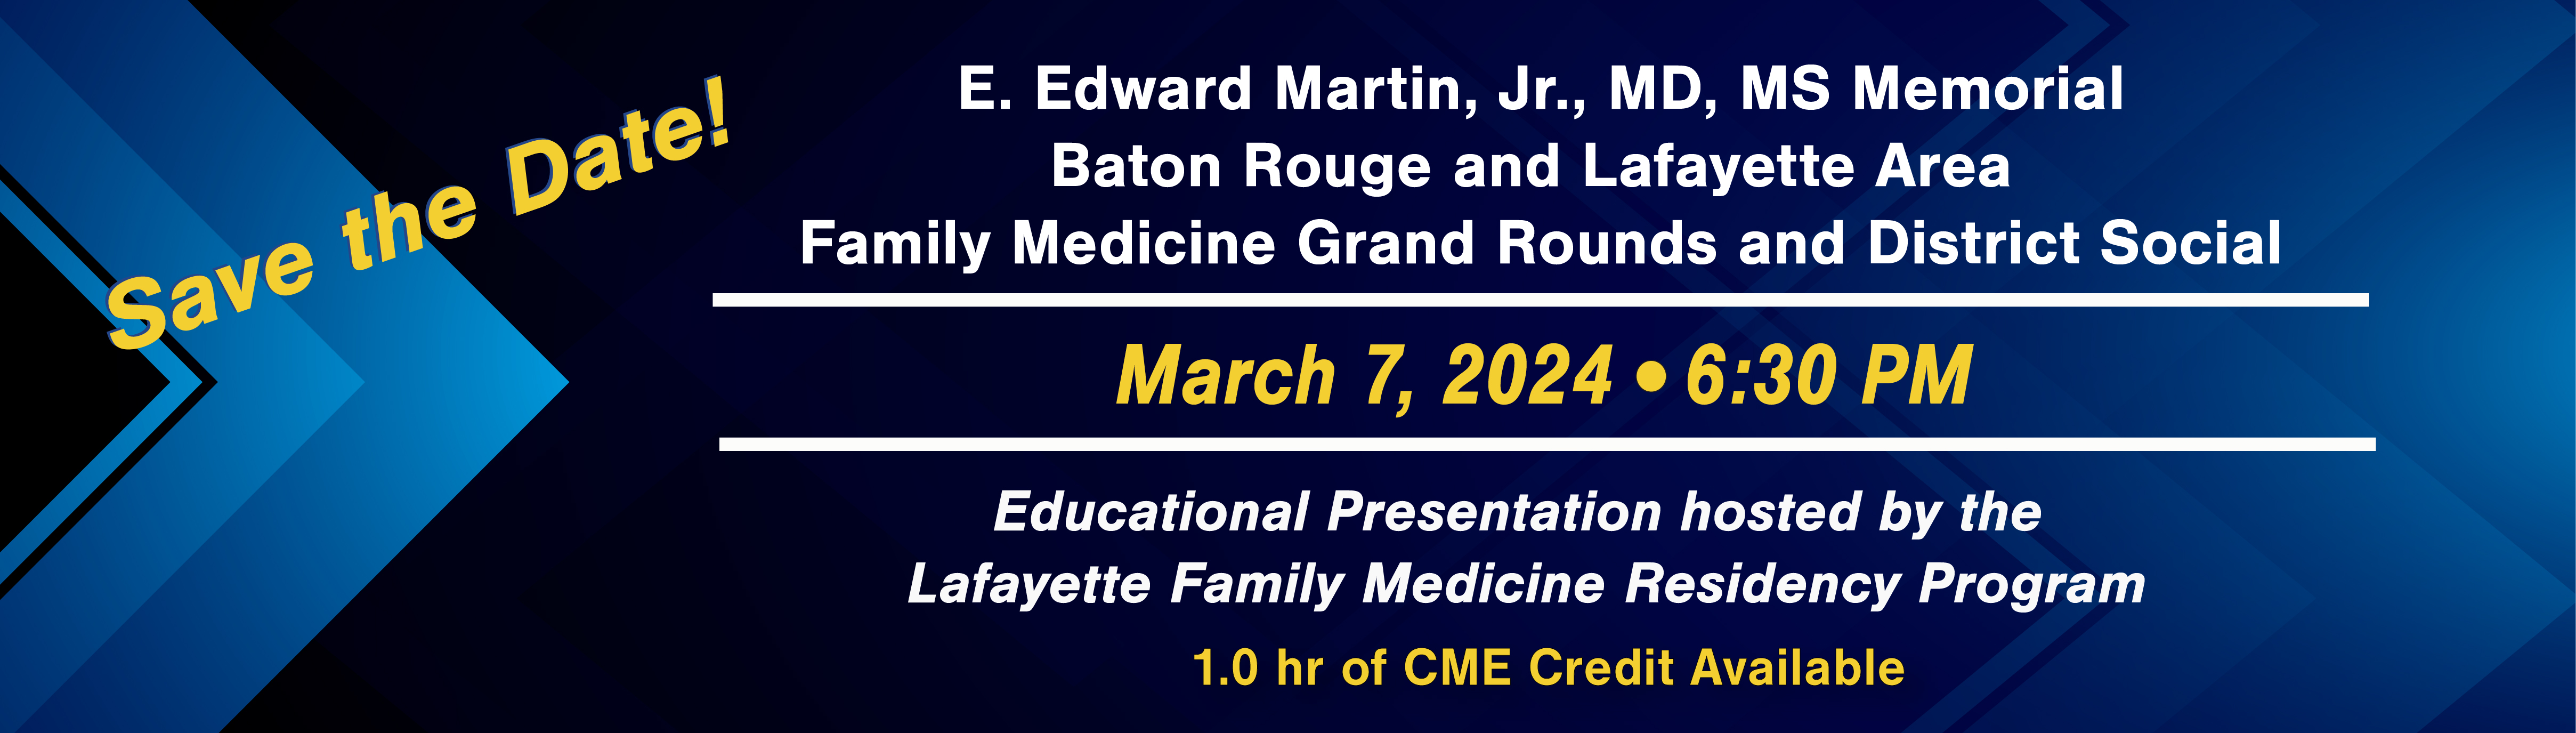 Grand Rounds web banner 01